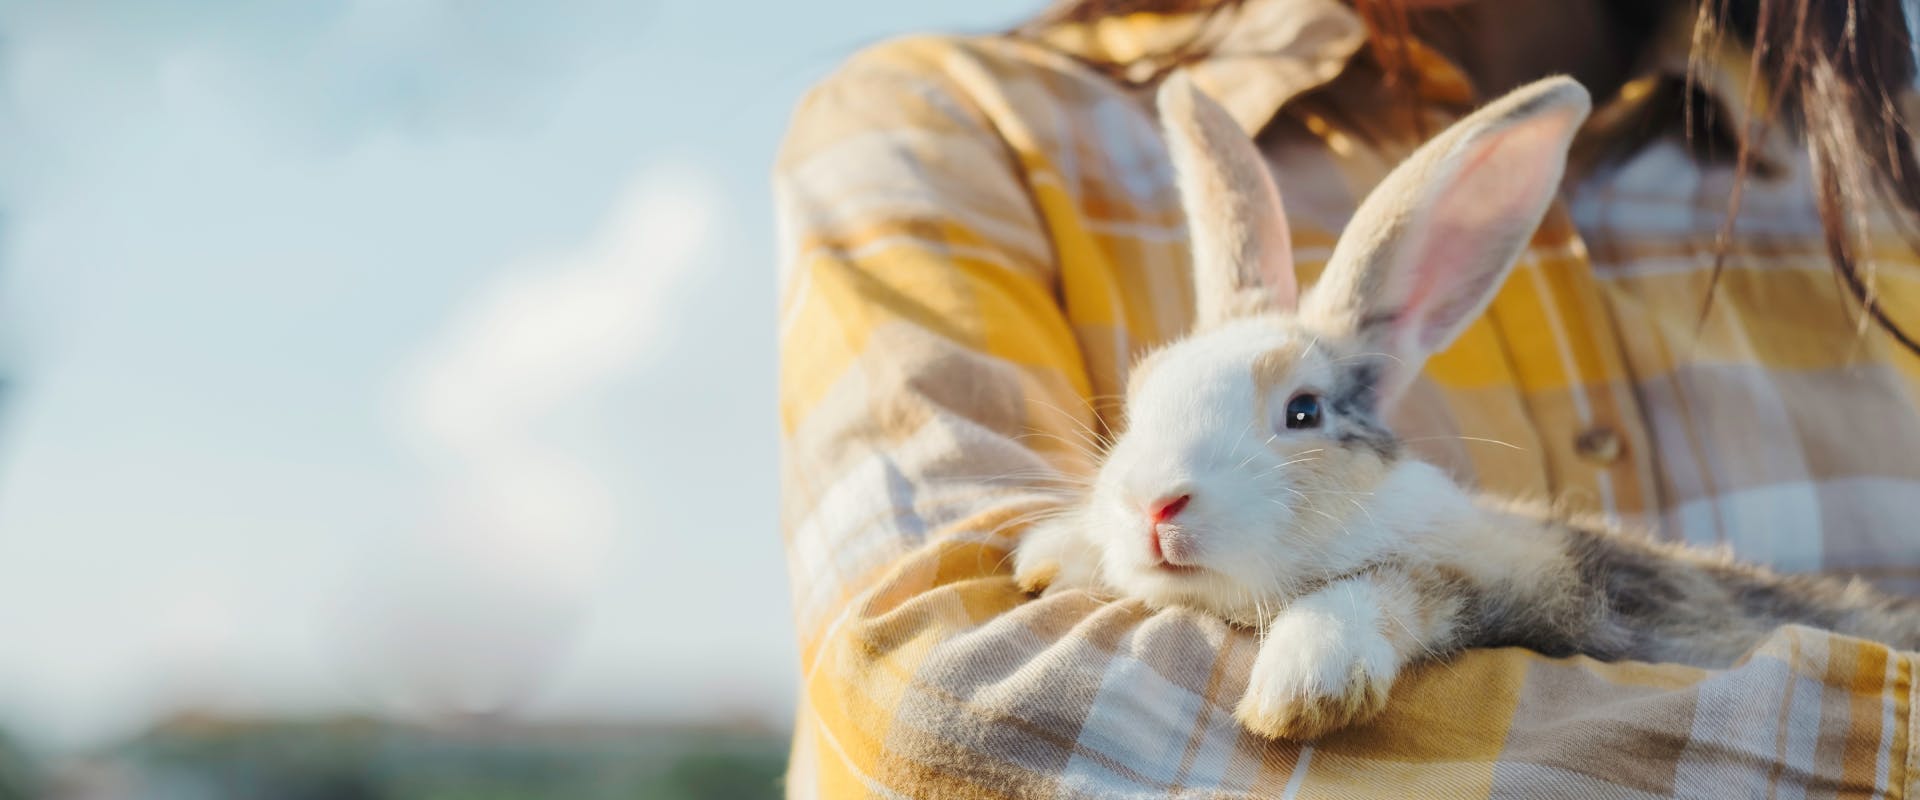 a multi-colored rabbit being held in the arms of a pet sitter in a yellow chequered shirt